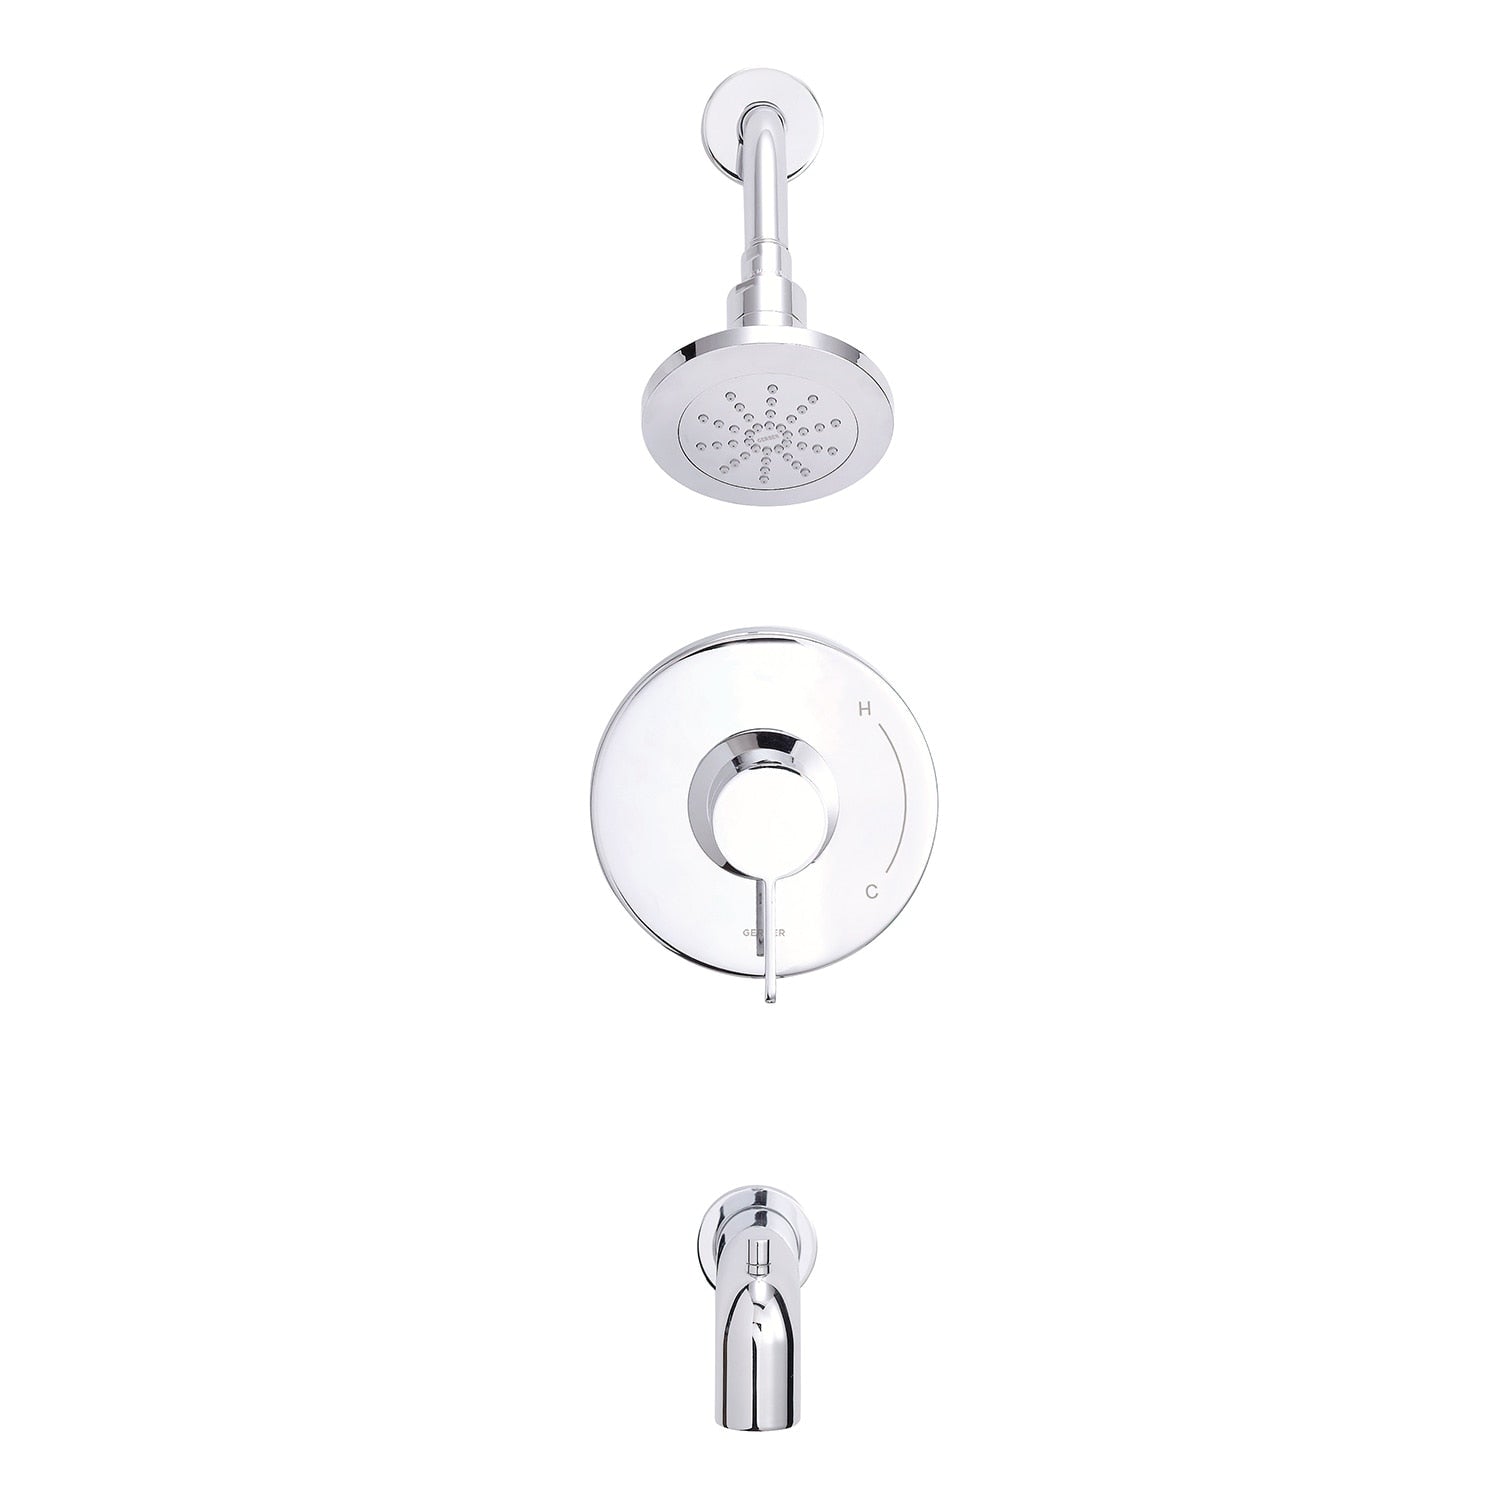 Danze by Gerber Amalfi 1H Tub and Shower Trim Kit w/Diverter on Spout and Treysta Cartridge 1.75gpm